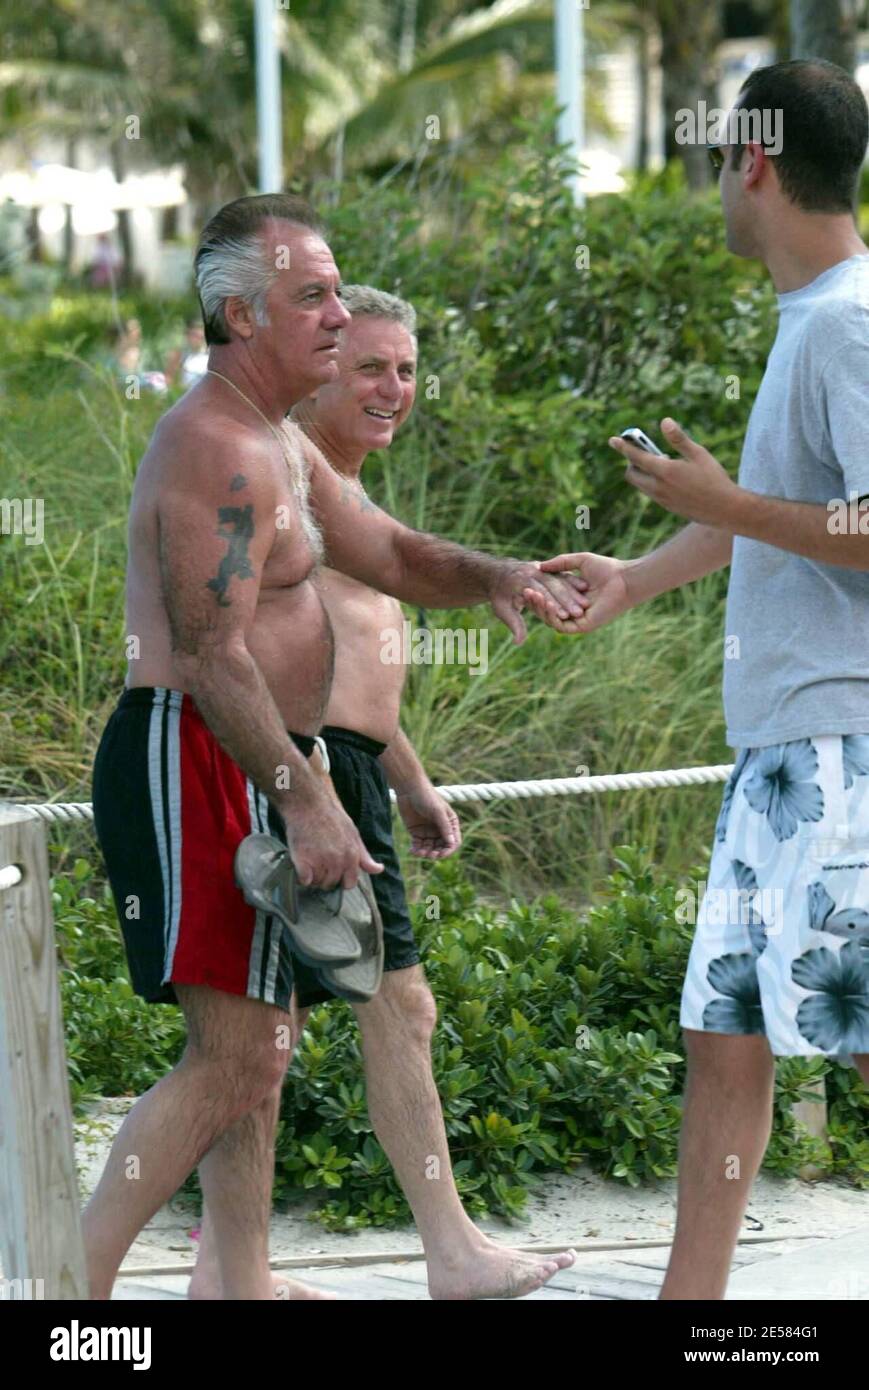 Actor Tony Sircio, Pauly Walnuts in the "Sopranos" TV series has fun with  female fans as he plays in the surf on Miami Beach, Fla. 5/10/07. [[mab]]  Stock Photo - Alamy